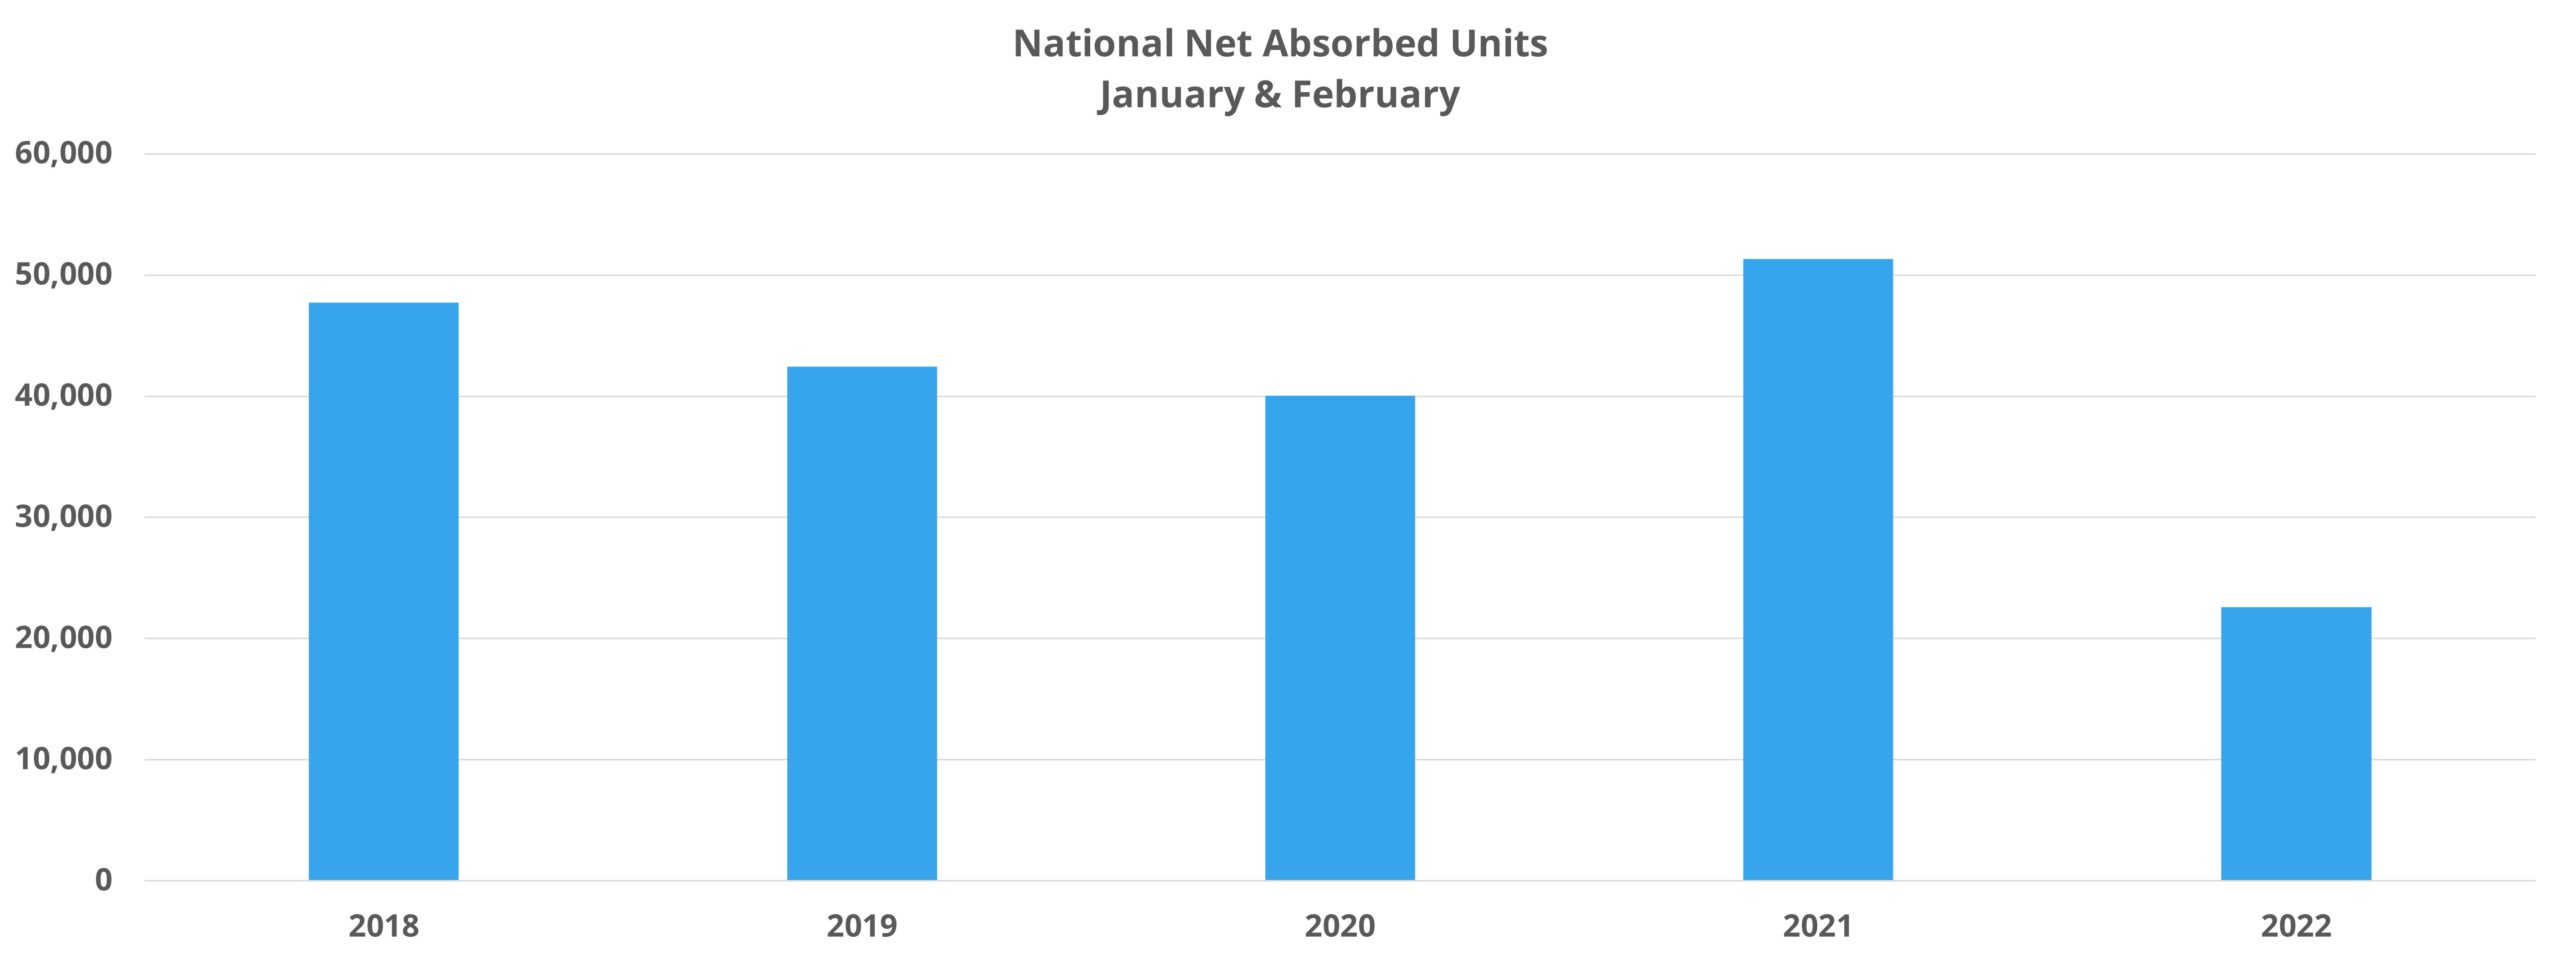 National Net Absorbed Units